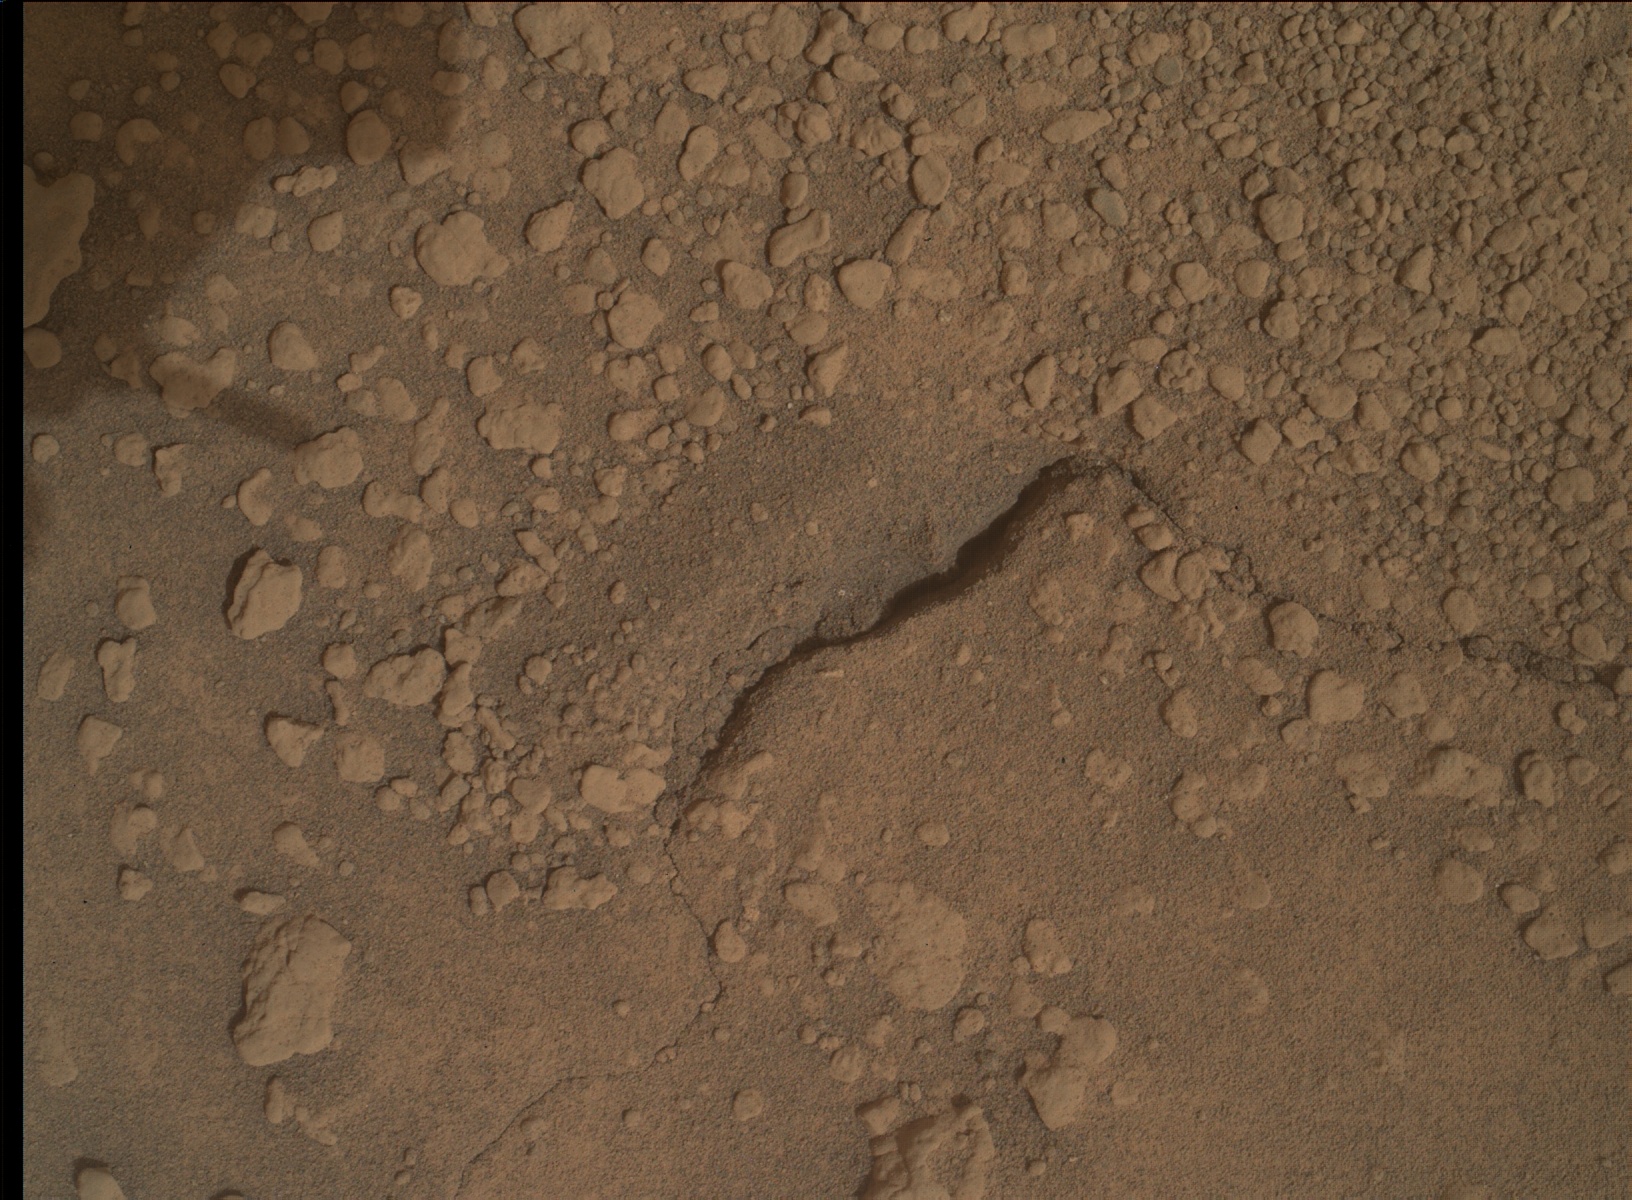 Nasa's Mars rover Curiosity acquired this image using its Mars Hand Lens Imager (MAHLI) on Sol 3635